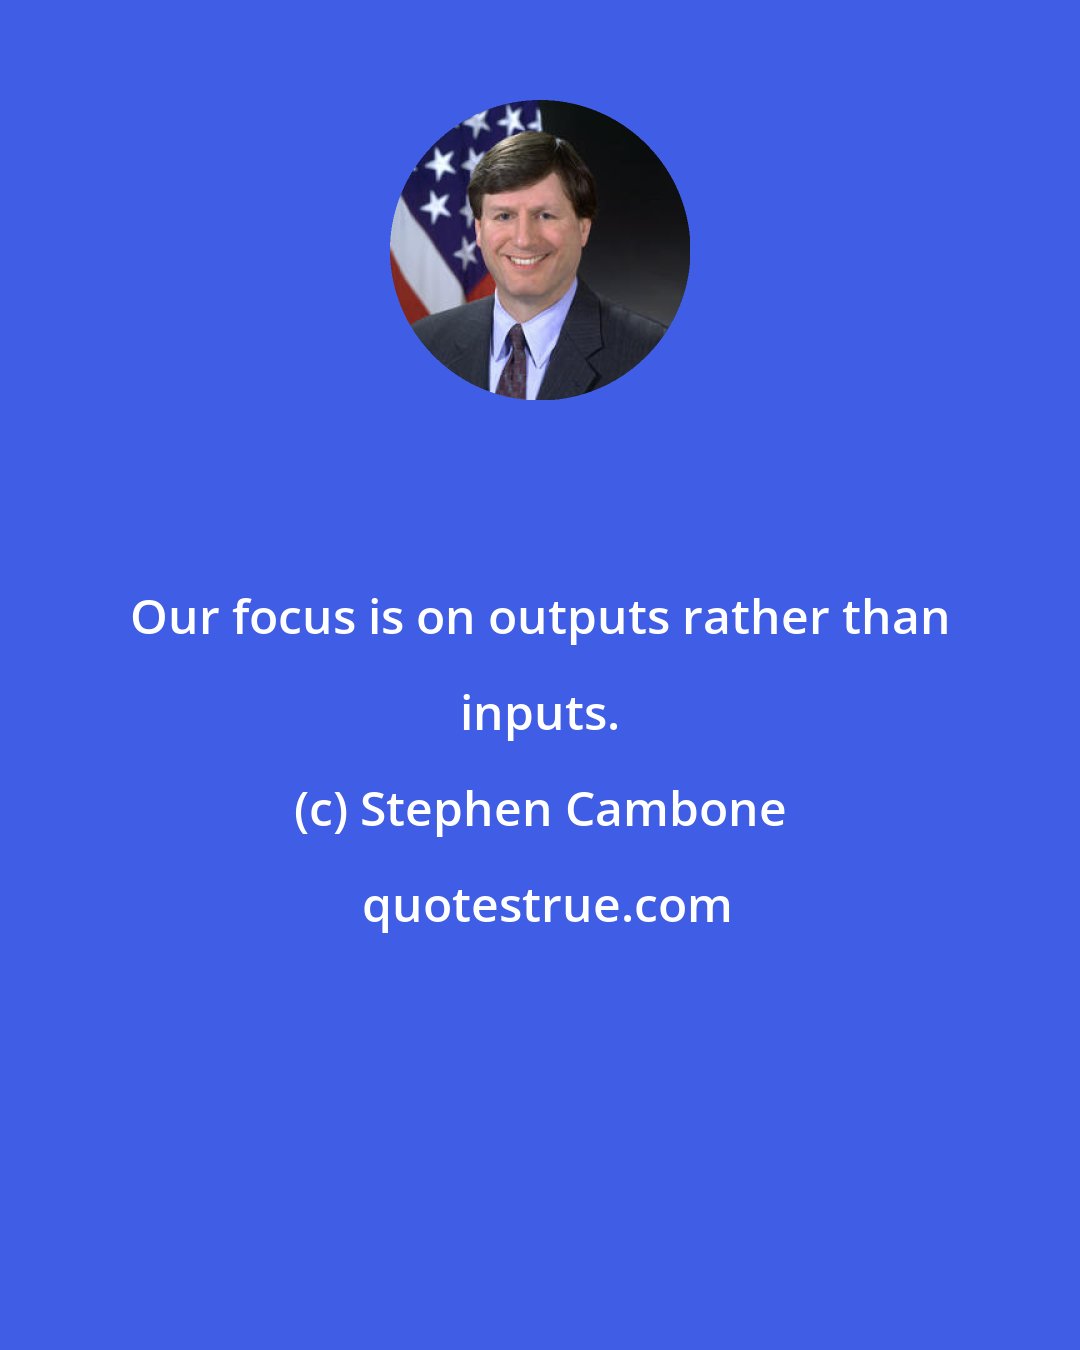 Stephen Cambone: Our focus is on outputs rather than inputs.